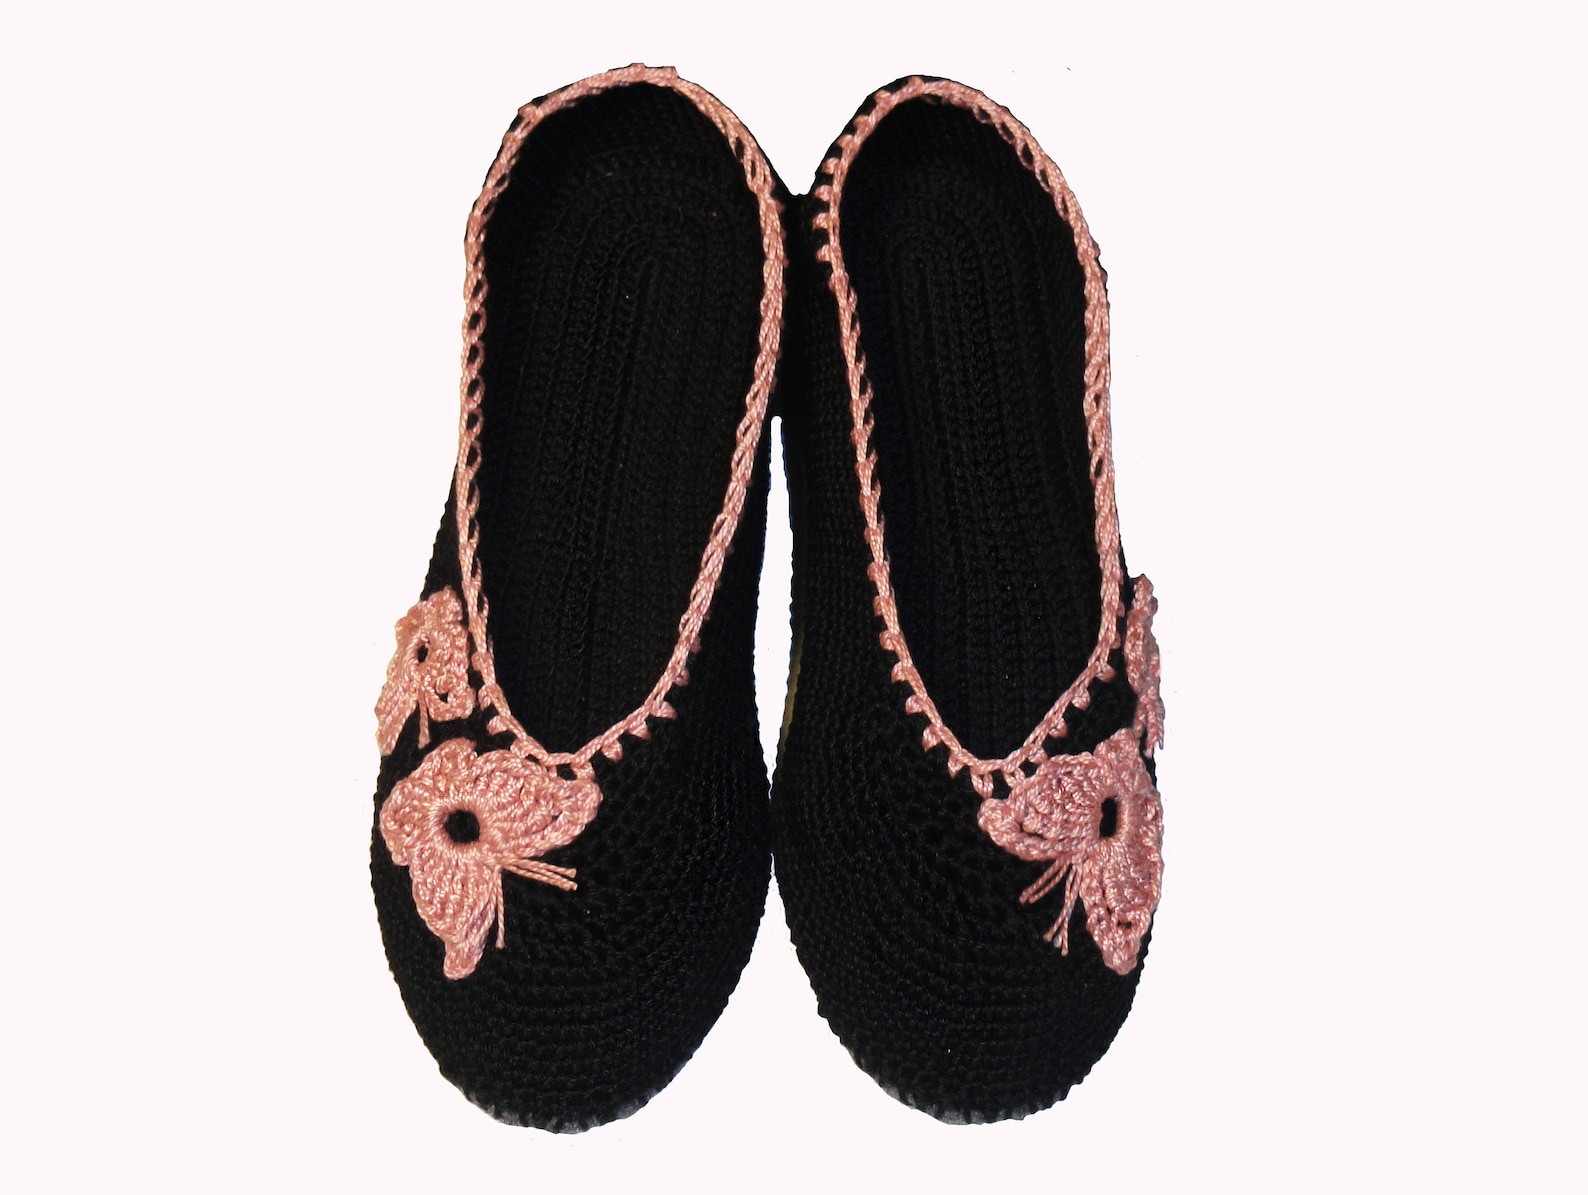 Сrochet slippers pattern, ballet shoes, slippers for women, slippers with butterflies pdf - pattern only